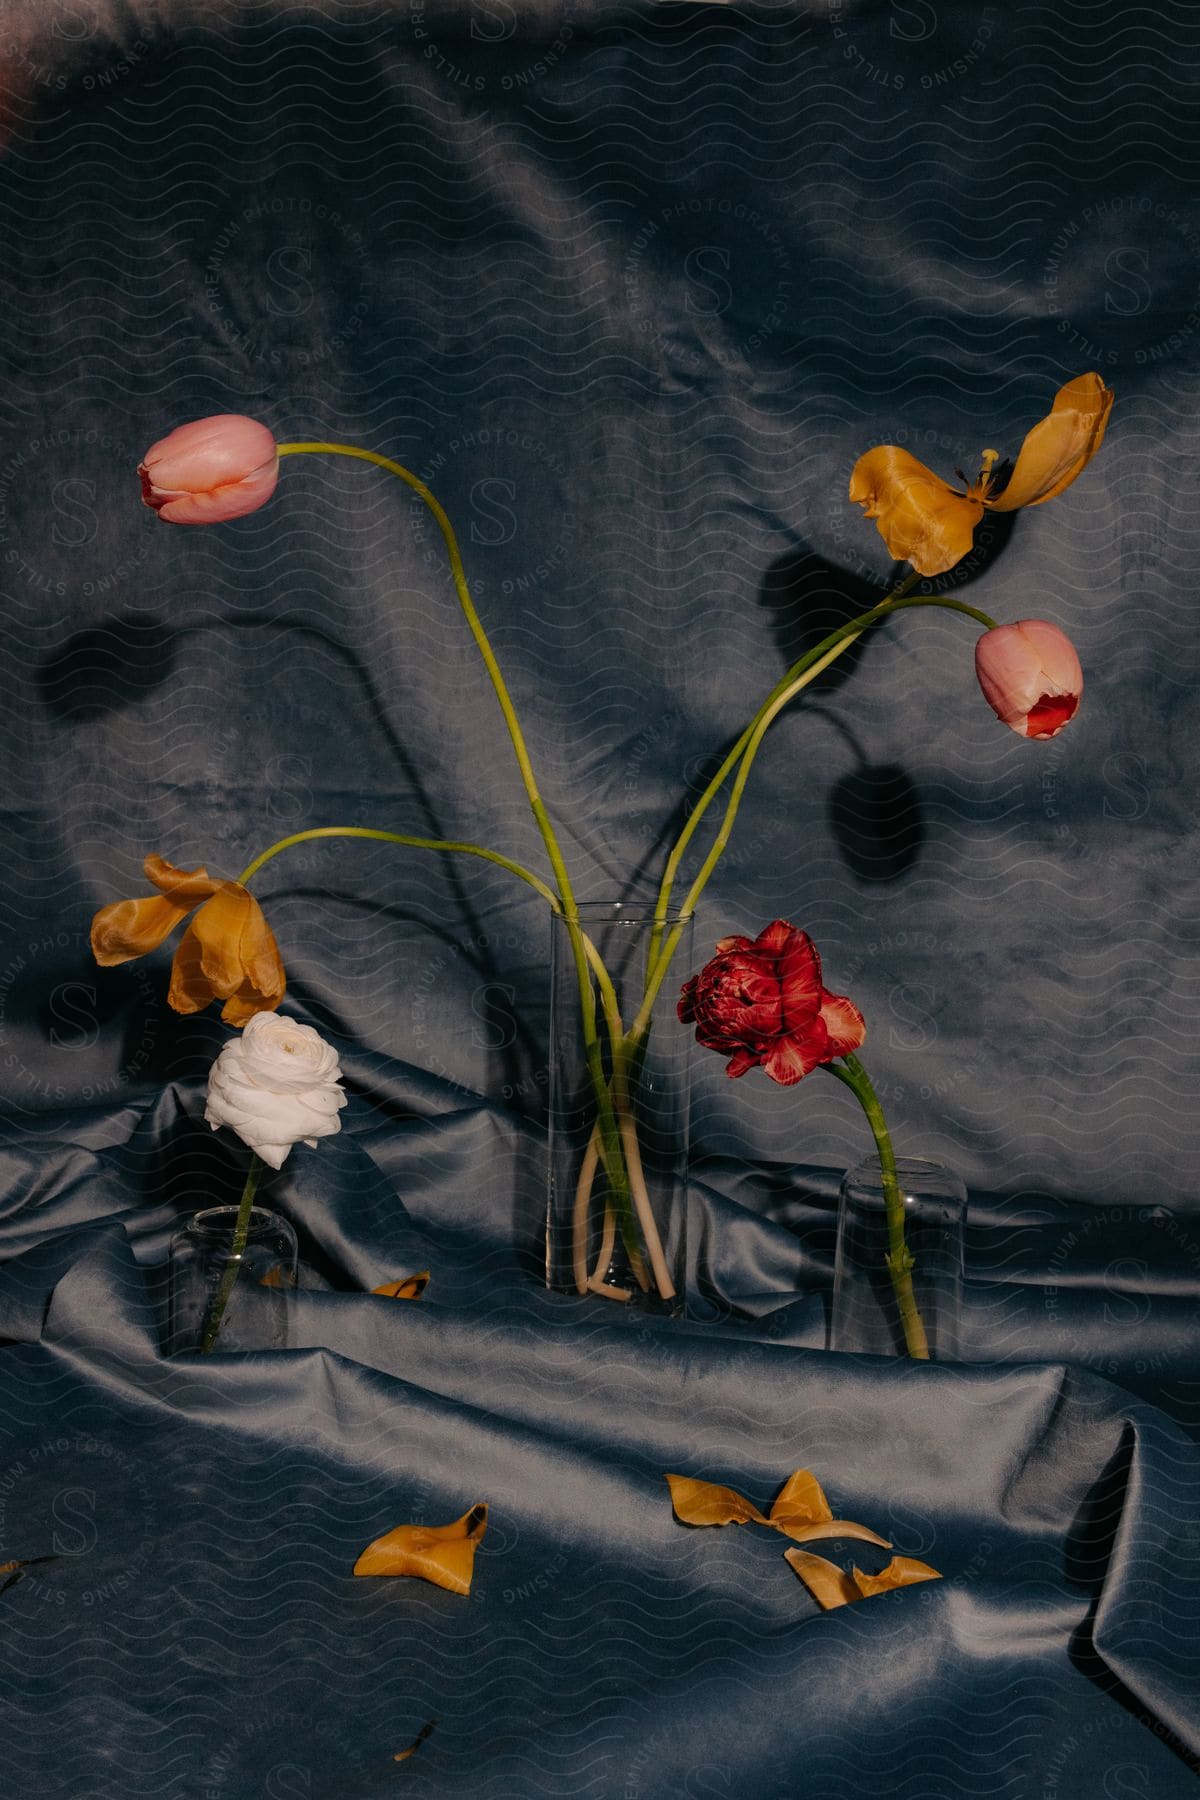 A collection of flowers in vases on a draped fabric